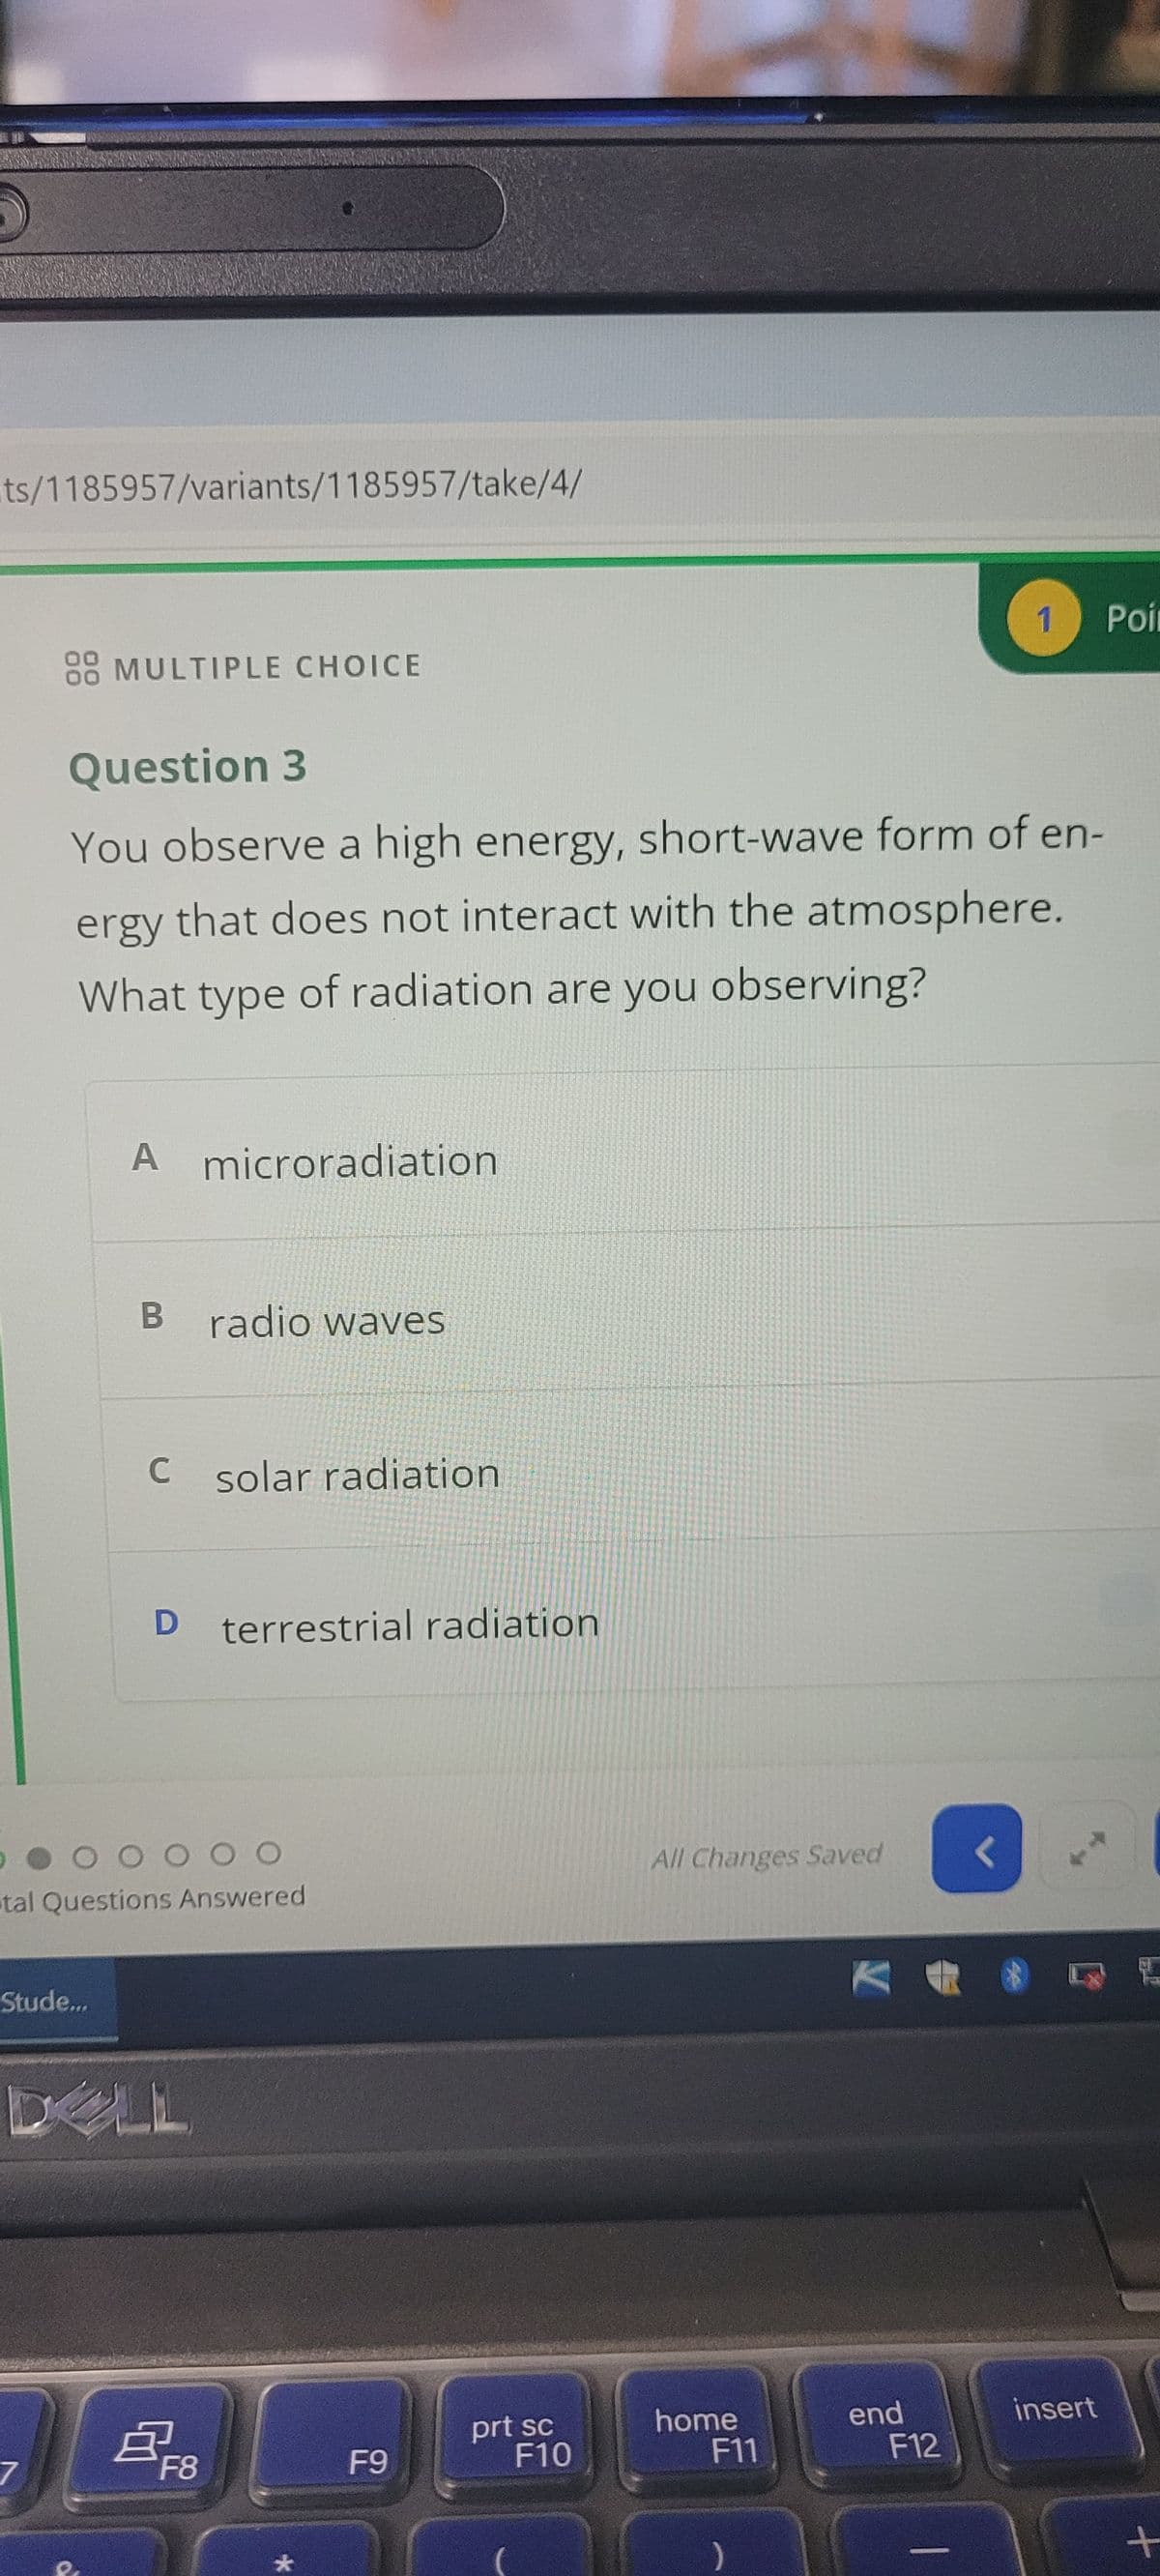 ts/1185957/variants/1185957/take/4/
1 Poin
08 MULTIPLE CHOICE
Question 3
You observe a high energy, short-wave form of en-
that does not interact with the atmosphere.
ergy
What type of radiation are you observing?
A microradiation
B
radio waves
C solar radiation
D
terrestrial radiation
O O O O O
tal Questions Answered
Stude...
DELL
7
耳F8
*
All Changes Saved
prt sc
F9
F10
home
F11
end
F12
insert
+